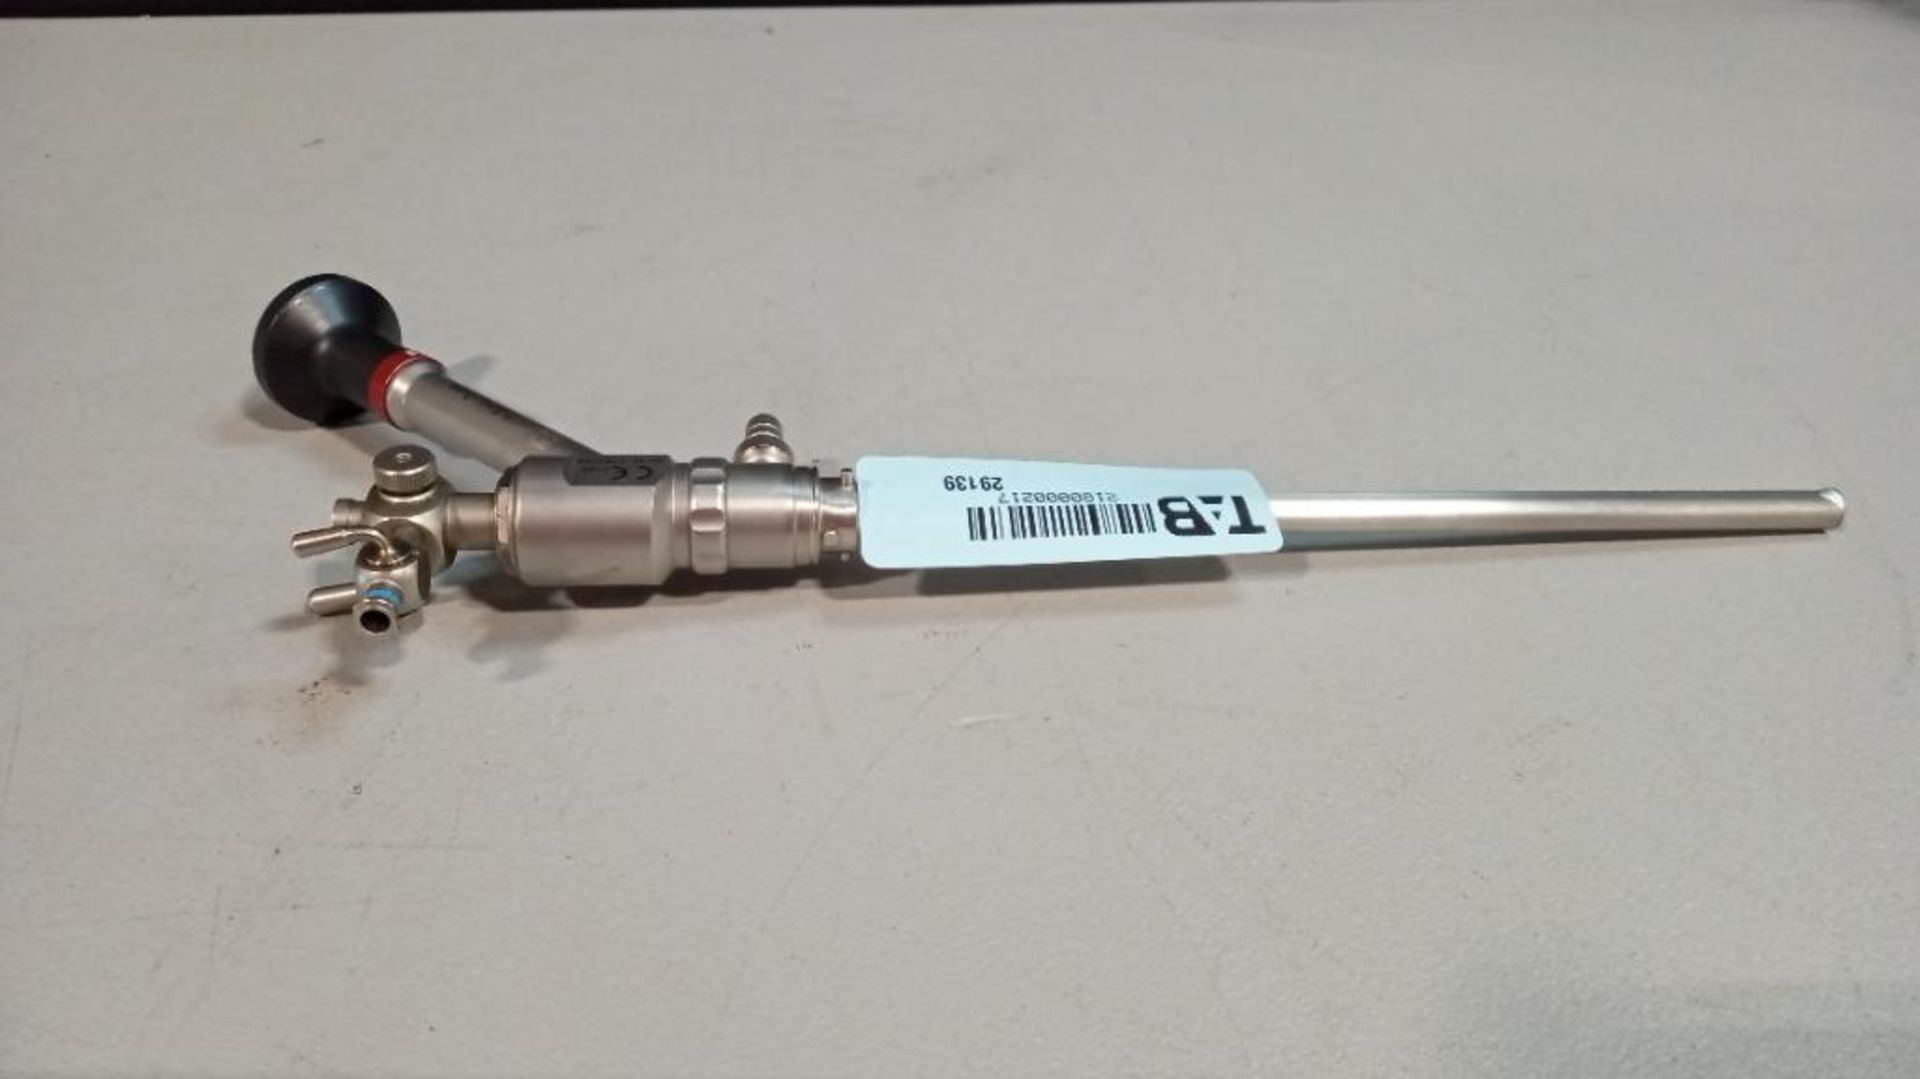 SMITH & NEPHEW 7209208 TRUCLEAR 0 DEGREE AUTOCLAVABLE HYSTEROSCOPE - Image 2 of 2